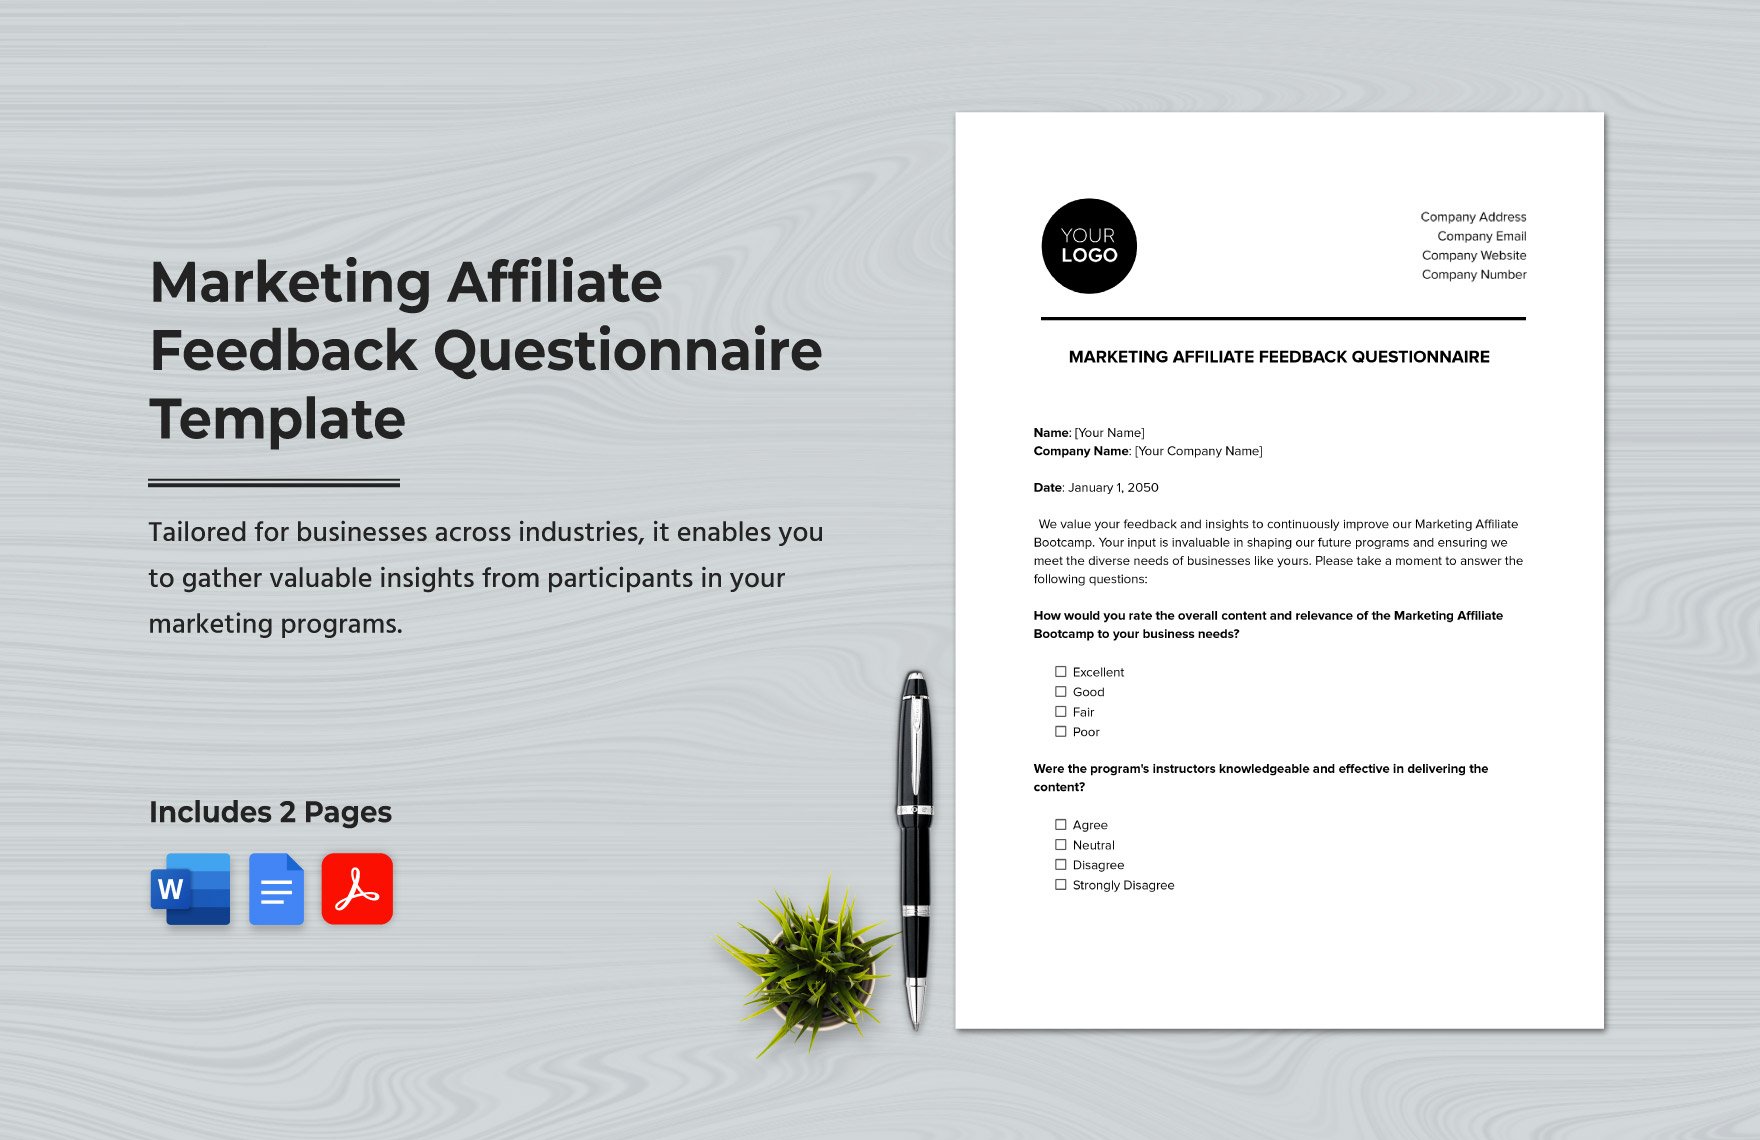 Marketing Affiliate Feedback Questionnaire Template in Word, Google Docs, PDF